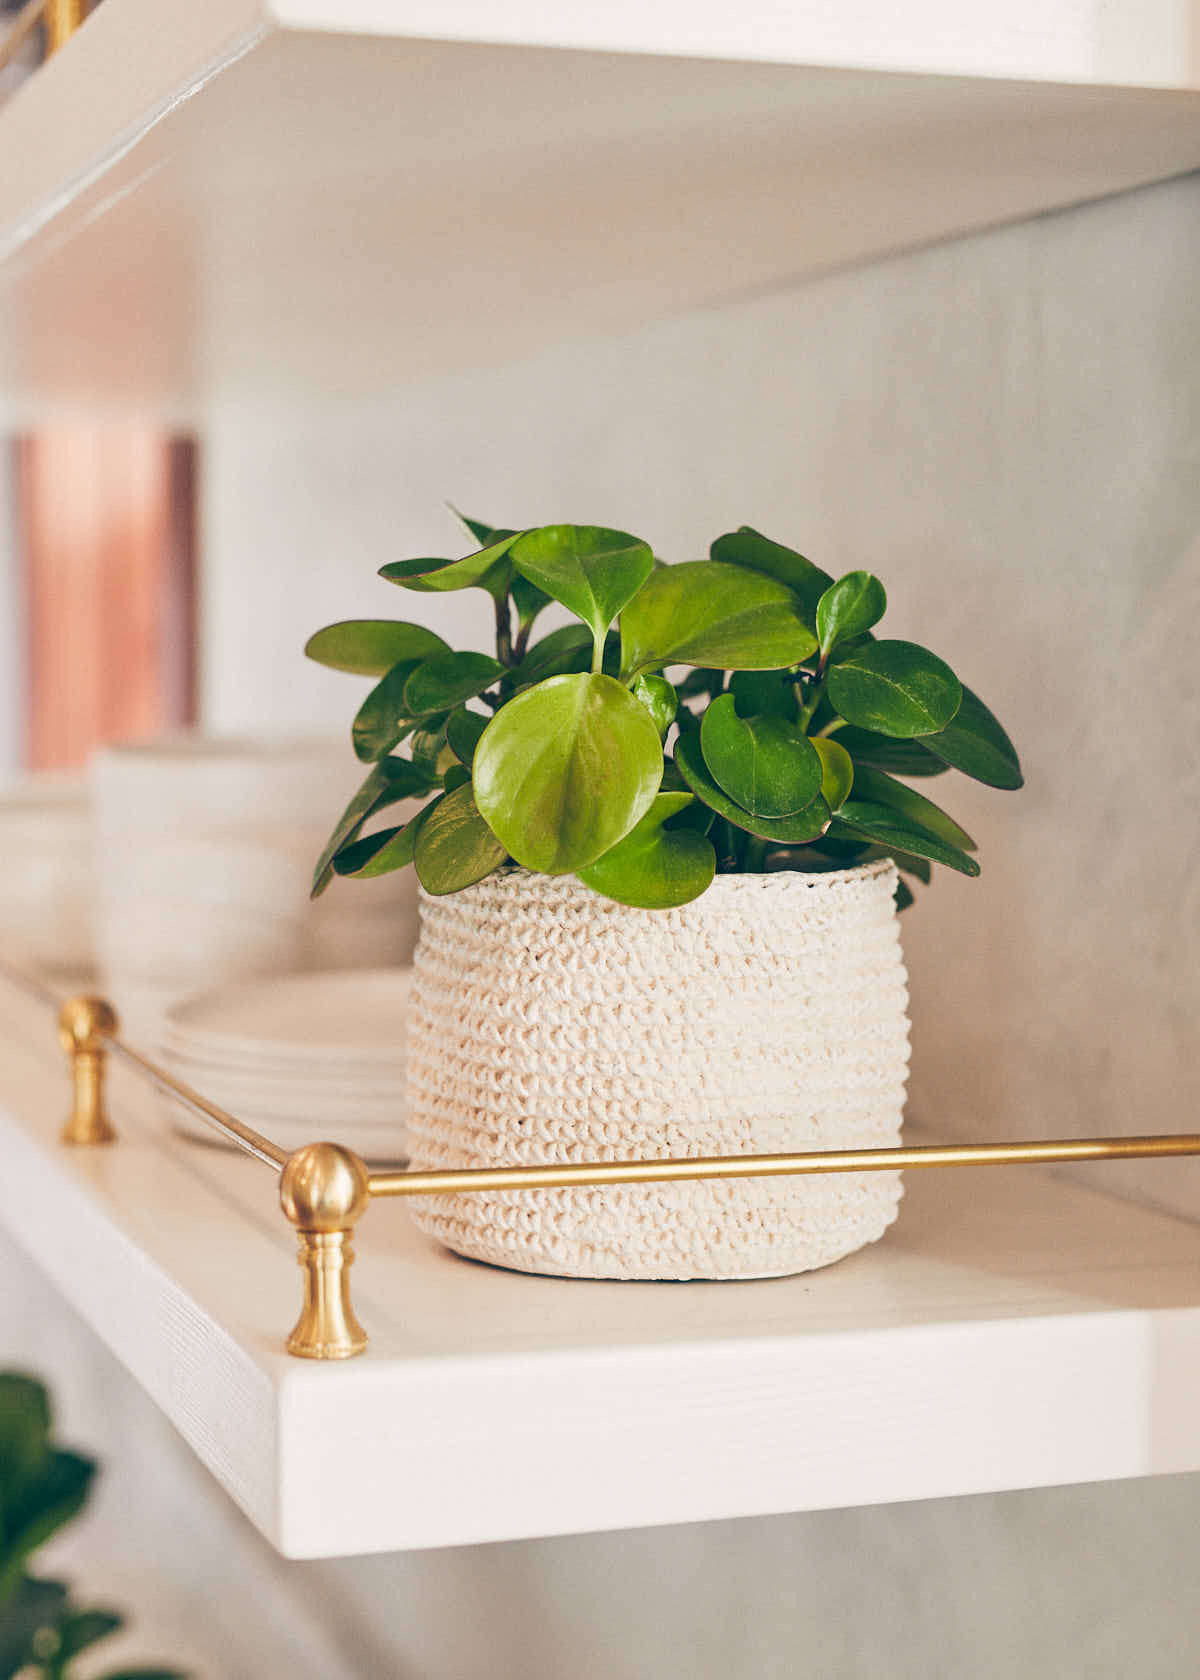 Baby Rubber Plant (Peperomia obtusifolia) in a white concrete textured planter on a floating kitchen shelf